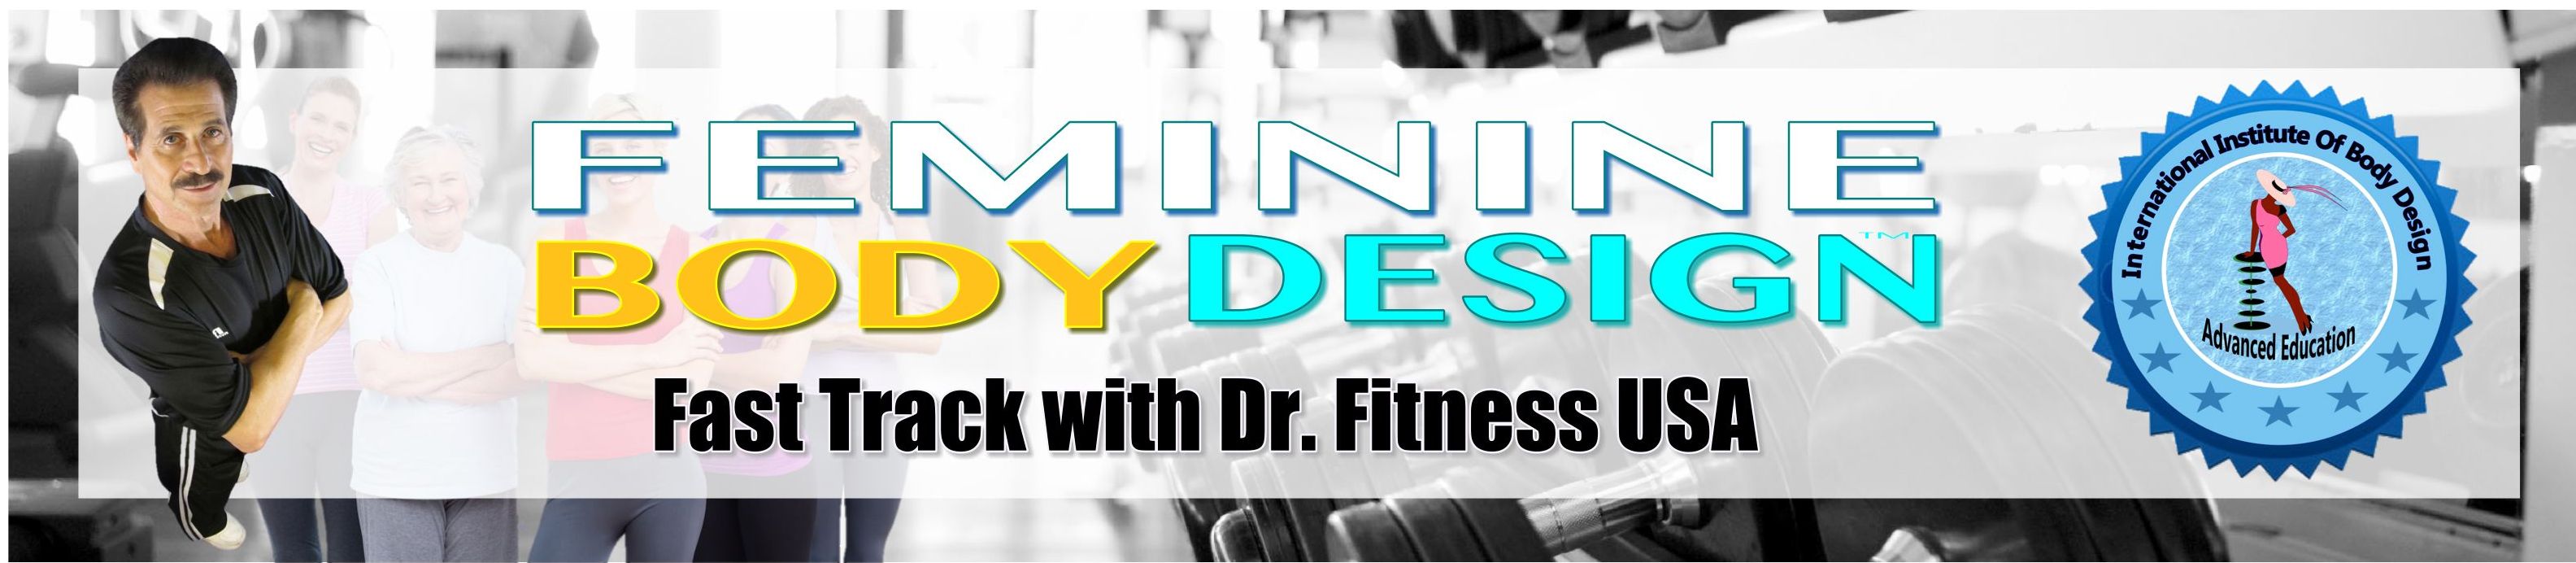 Feminine fast track with dr. fitness usa